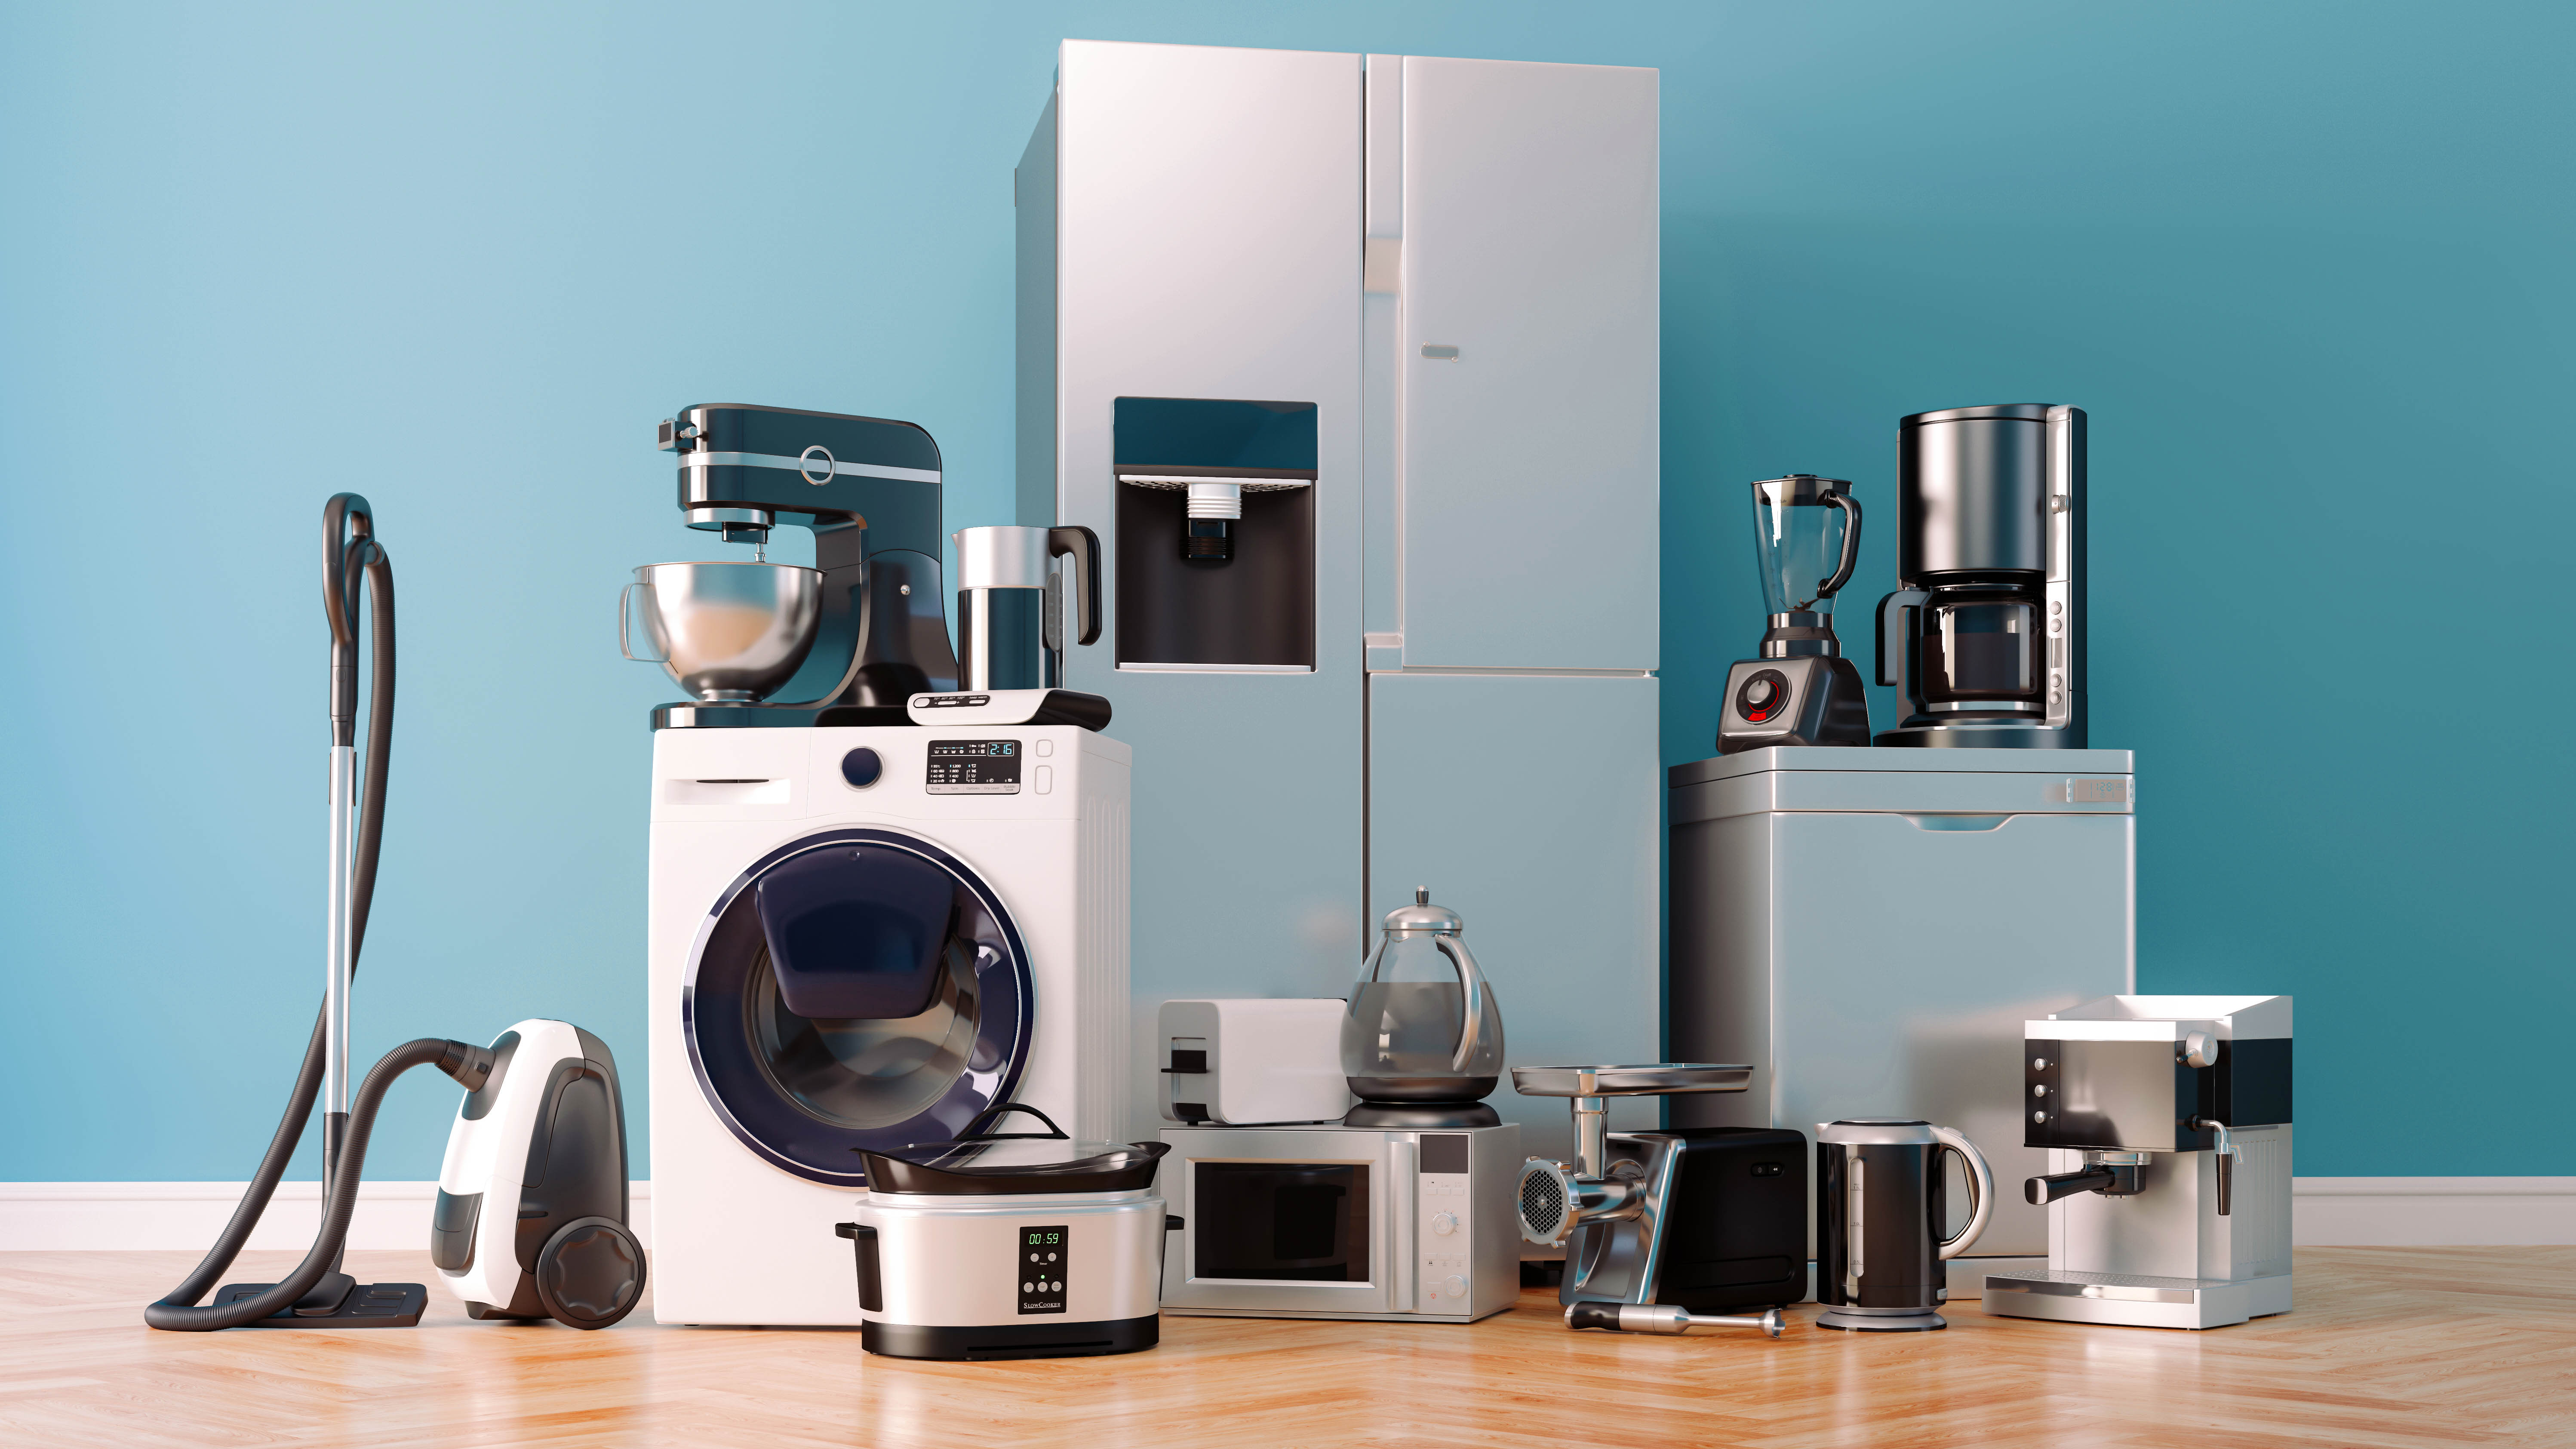 An assortment of appliances sitting on the floor, including a washing machine, fridge freezer, stand mixer, vacuum cleaner, dishwasher, microwave and coffee maker